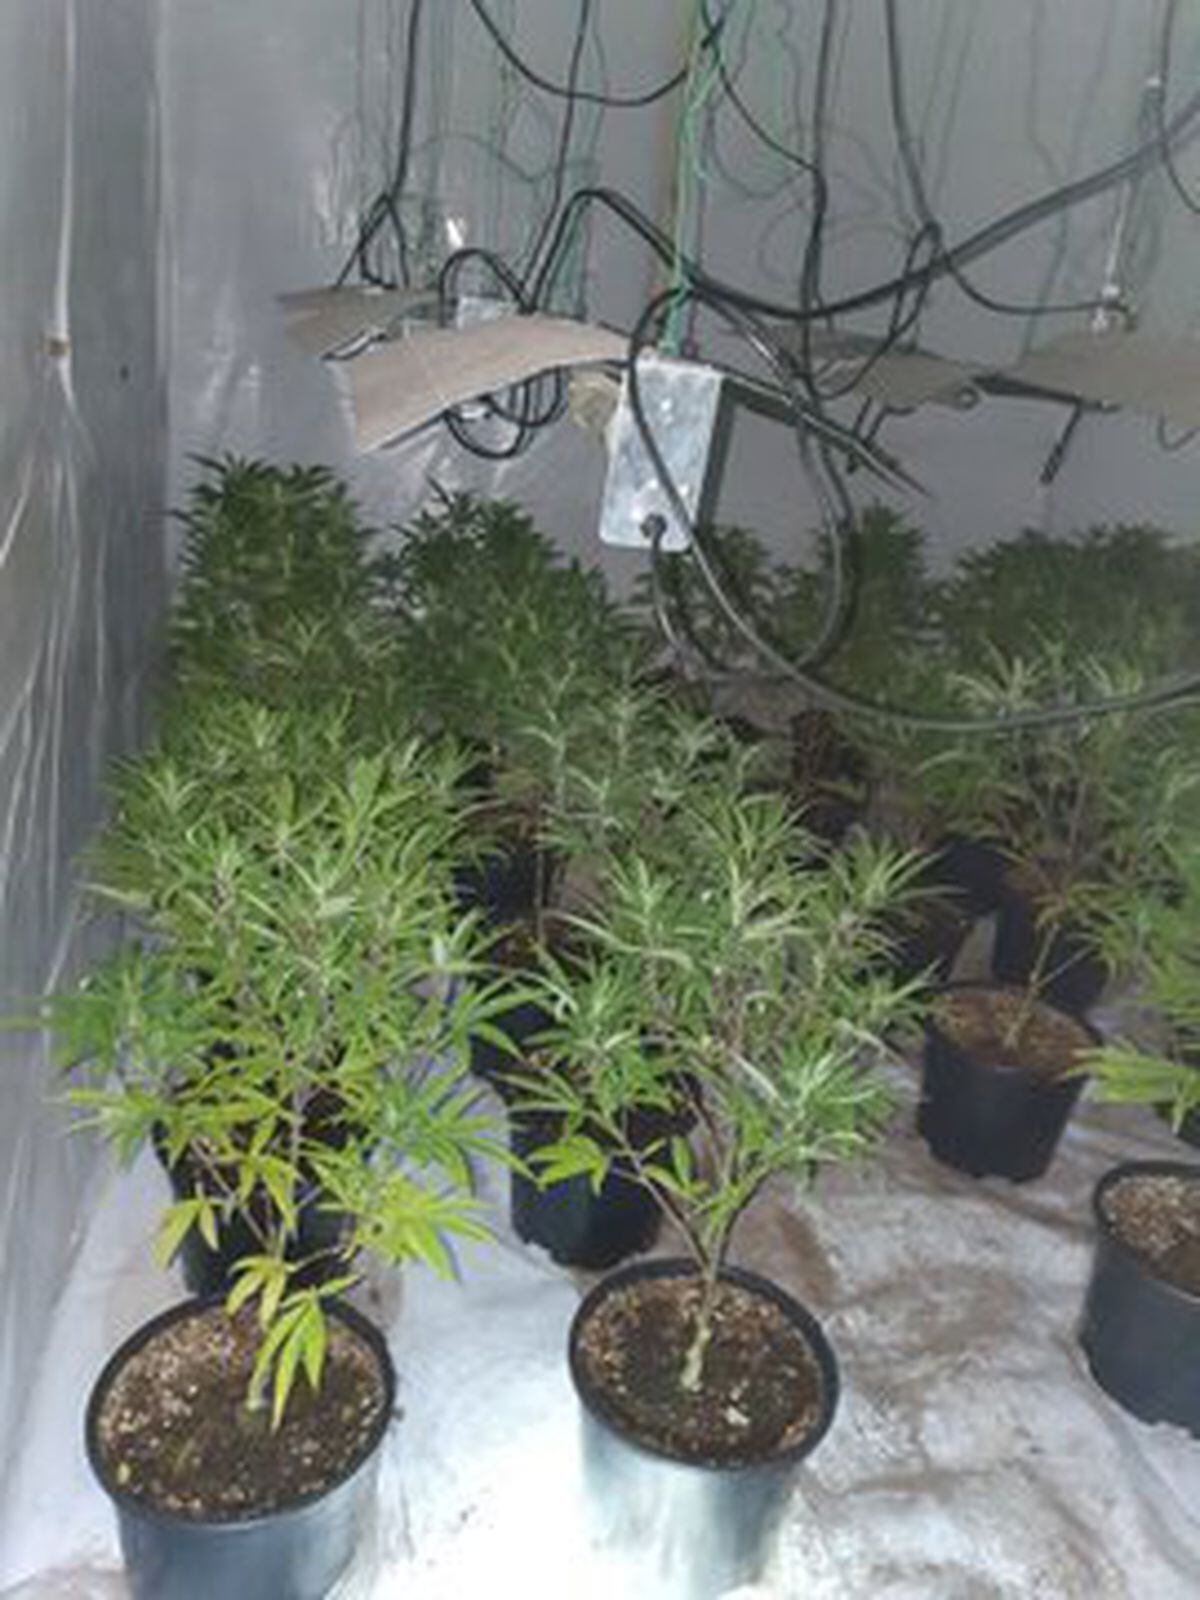 More than 300 plants were found in the property. Photo: Heath Town and East Park Police